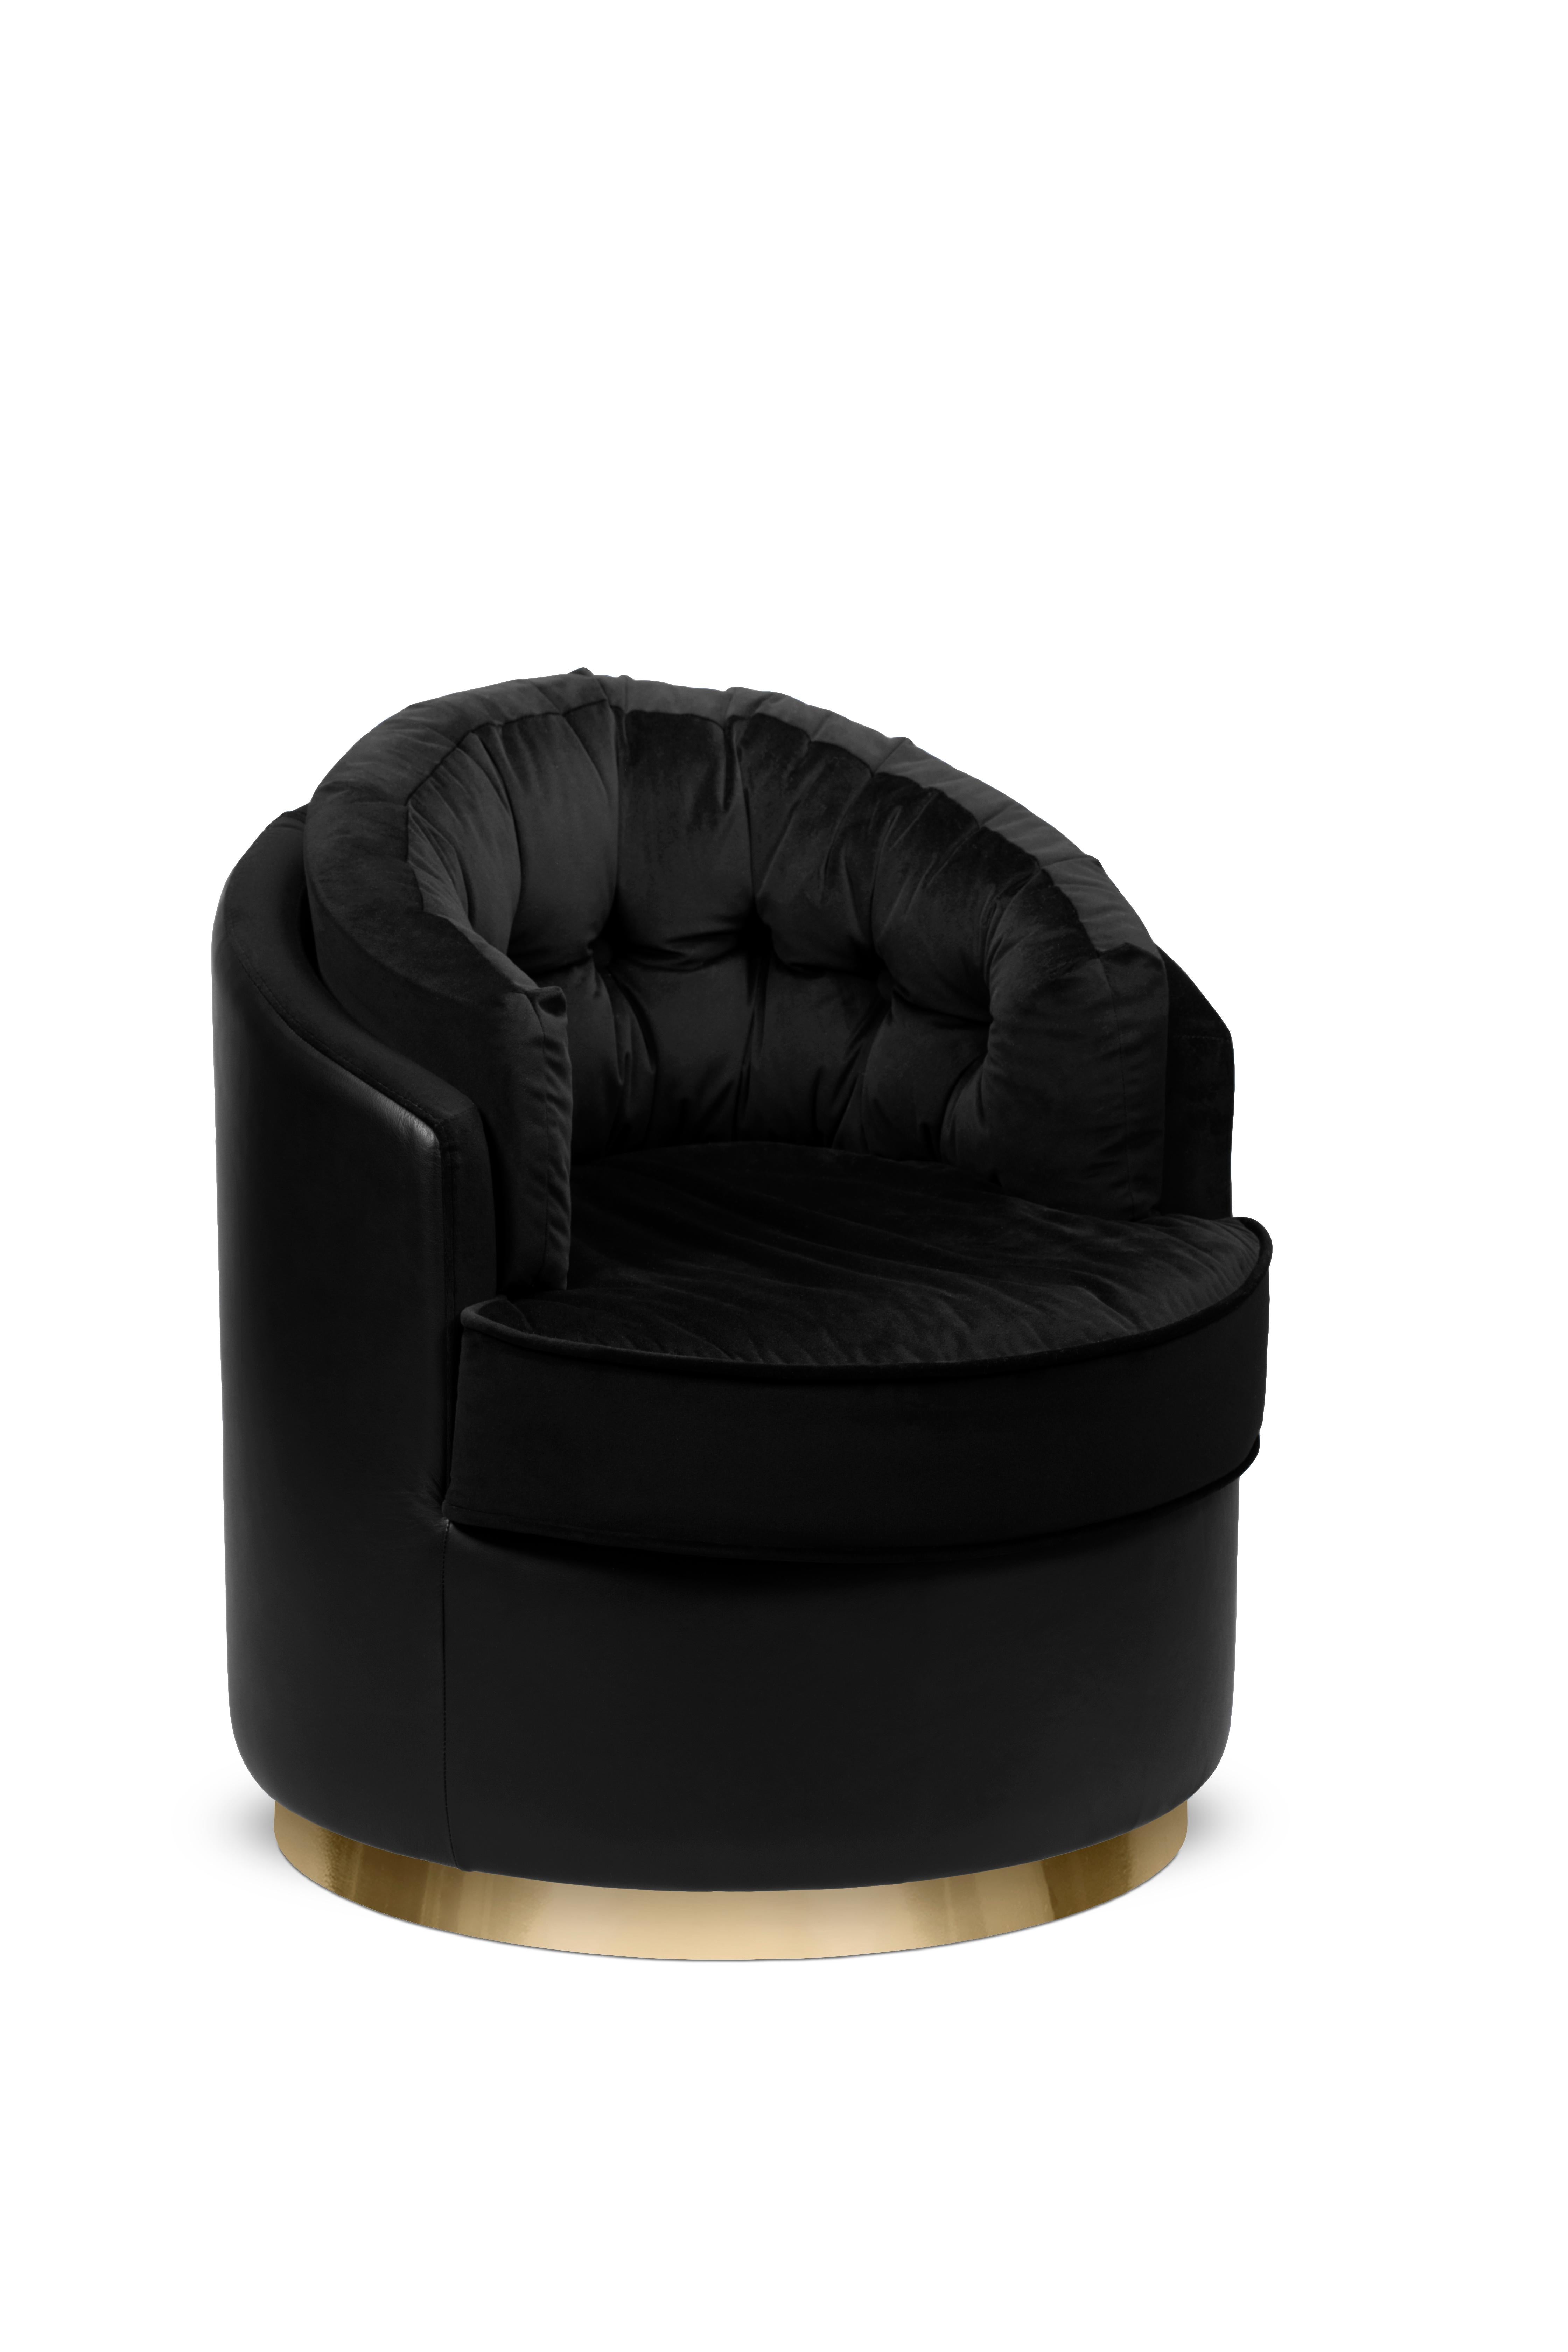 Otto armchair is Luxxu’s omen to its prosperous future, a luxurious design Empire. Made with noble materials, such as velvet and leather, the brass detail elevates this armchair into a masterpiece. Meaning greatness and fortune, this armchair is a